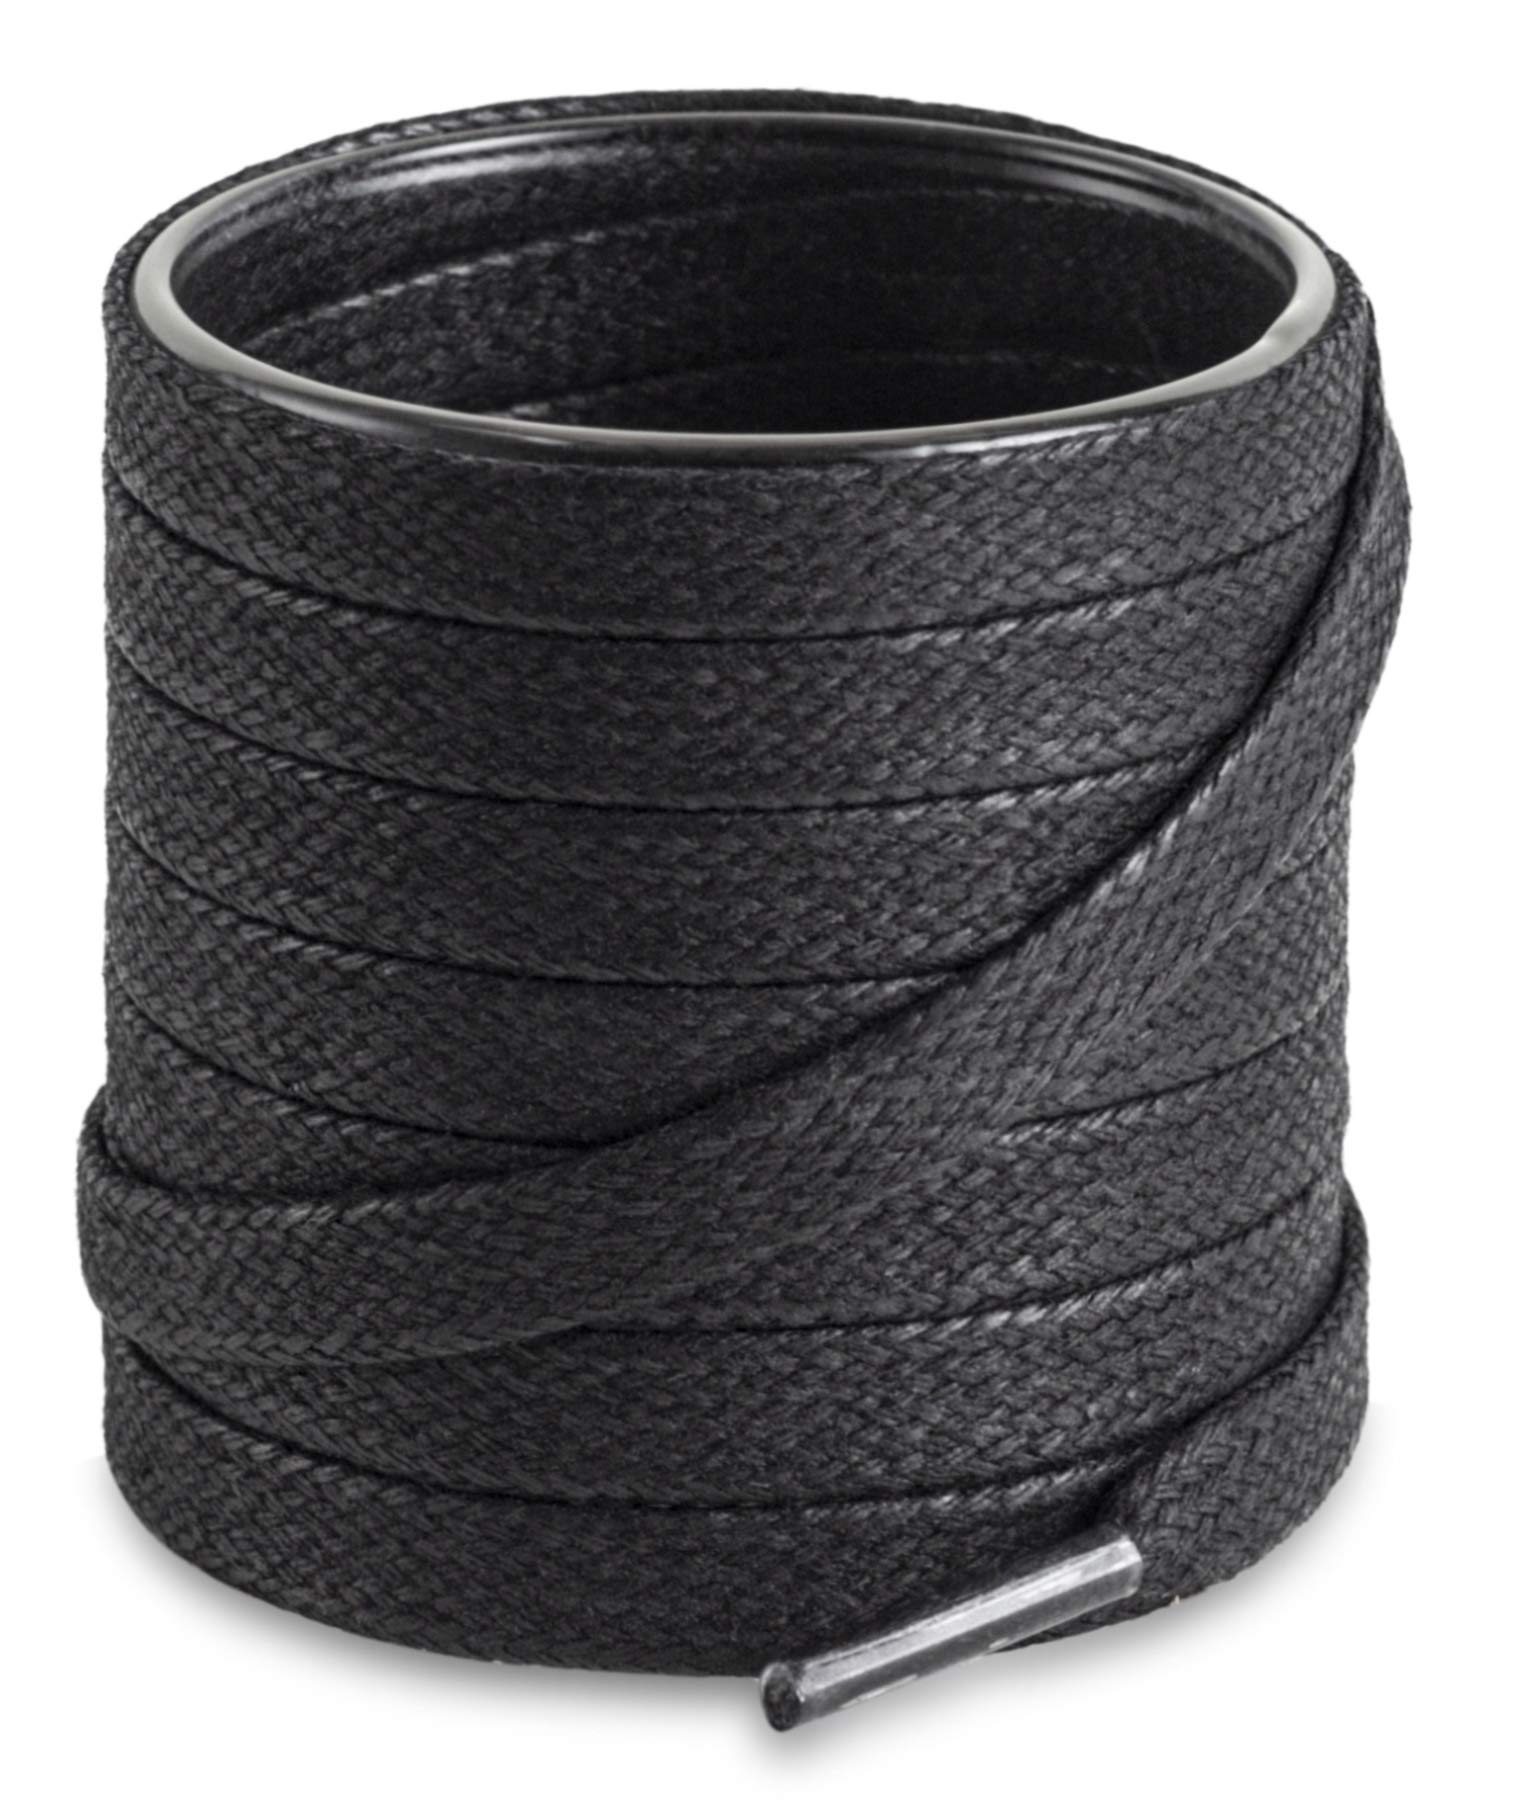 63 Black Flat Waxed Boot Laces for 6 or 7 Pair Eyelets = 12 14 Total Eyelets for Lace Up Boots Shoes 1/4 Wide